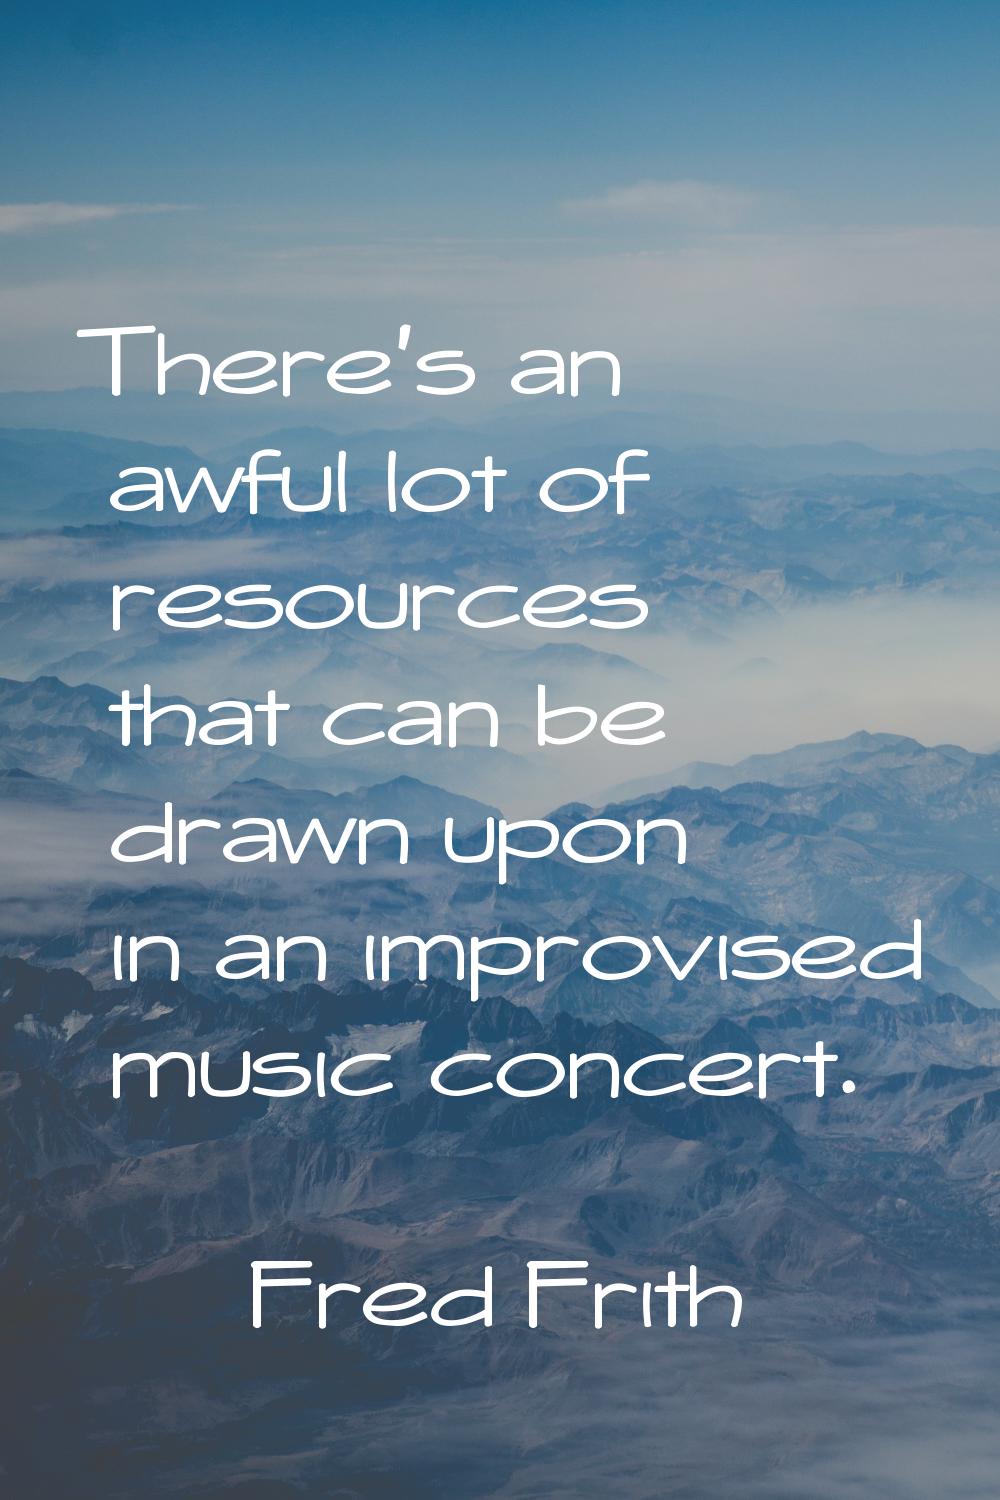 There's an awful lot of resources that can be drawn upon in an improvised music concert.